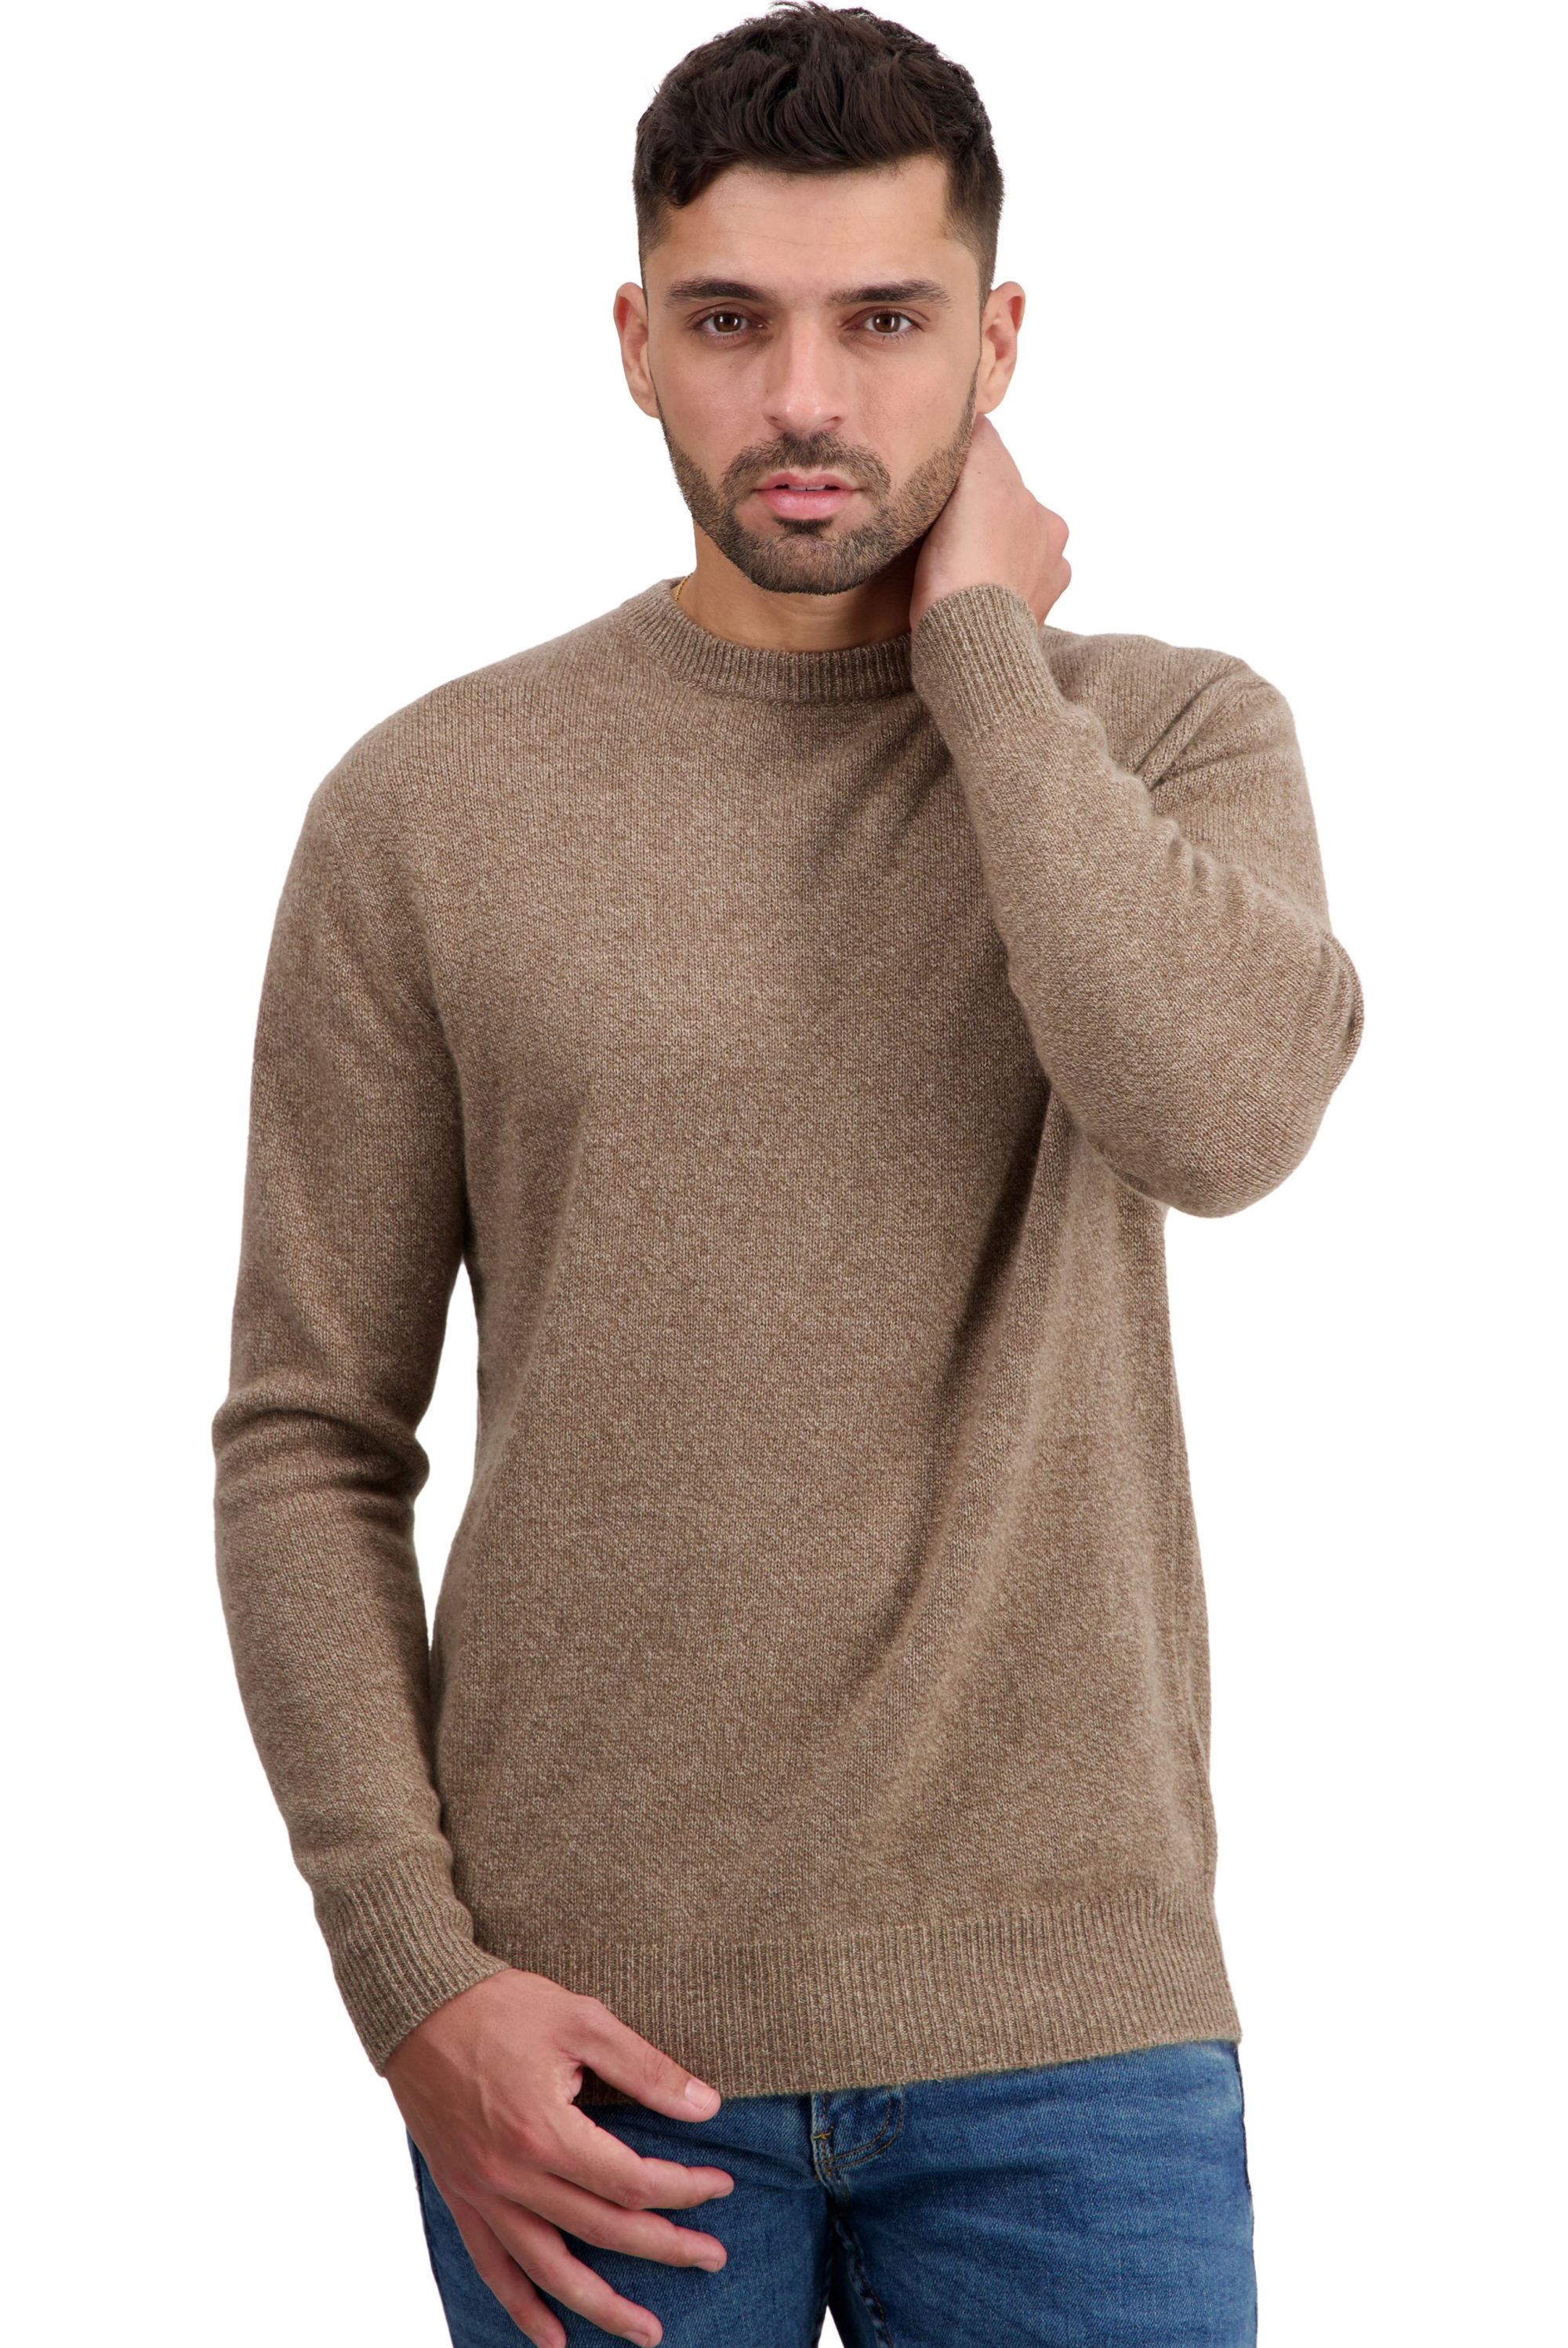 Cashmere men basic sweaters at low prices touraine first tan marl s